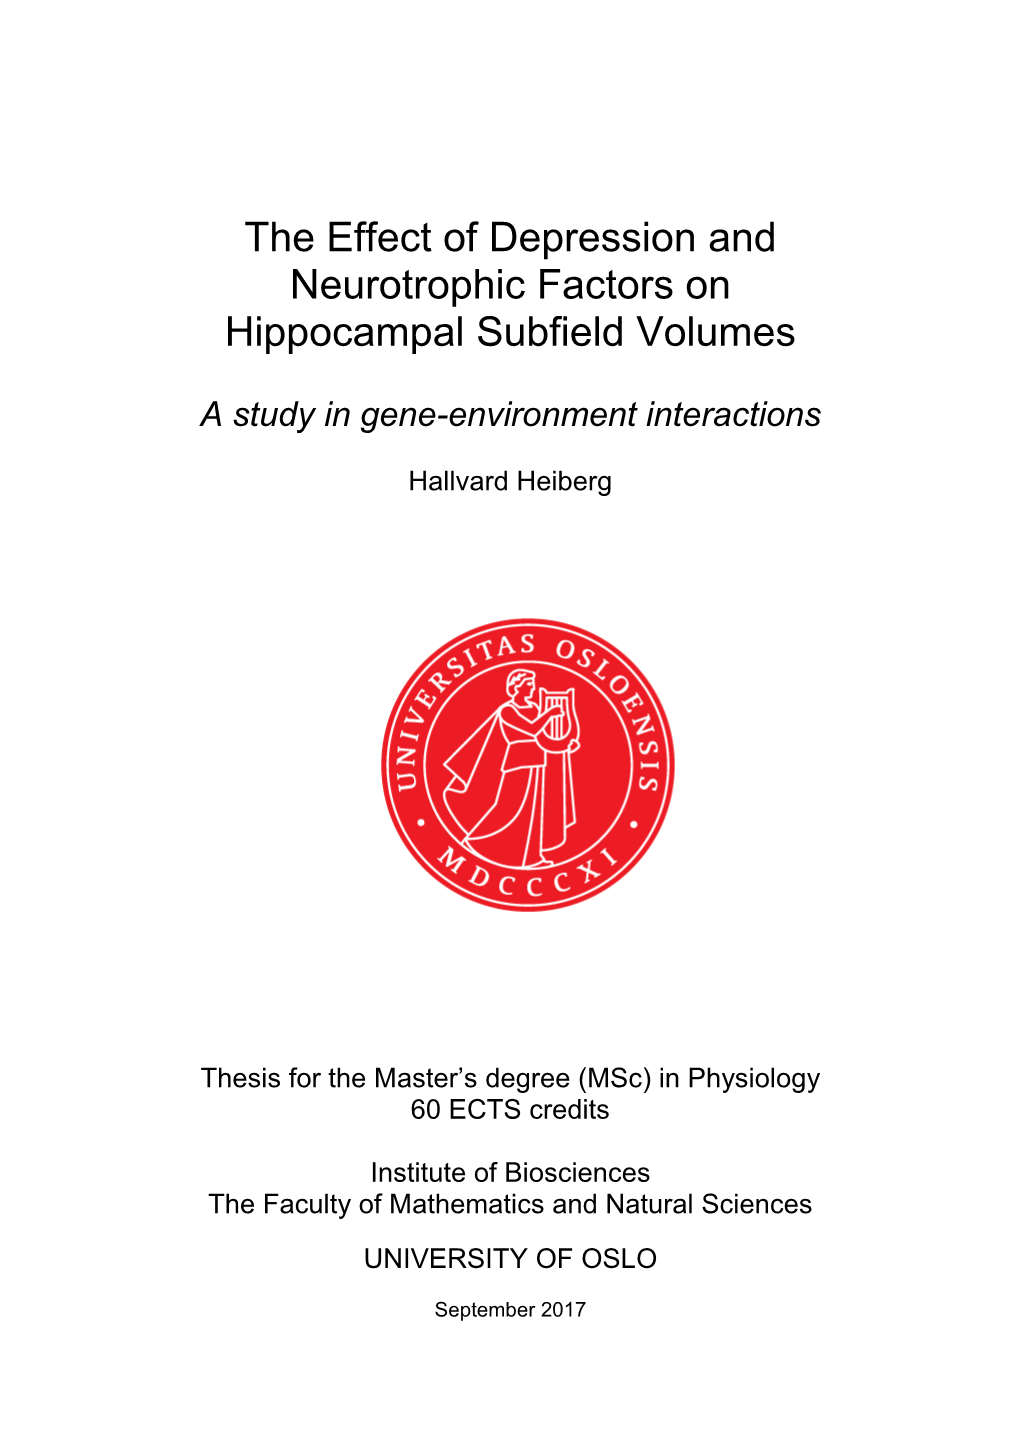 The Effect of Depression and Neurotrophic Factors On